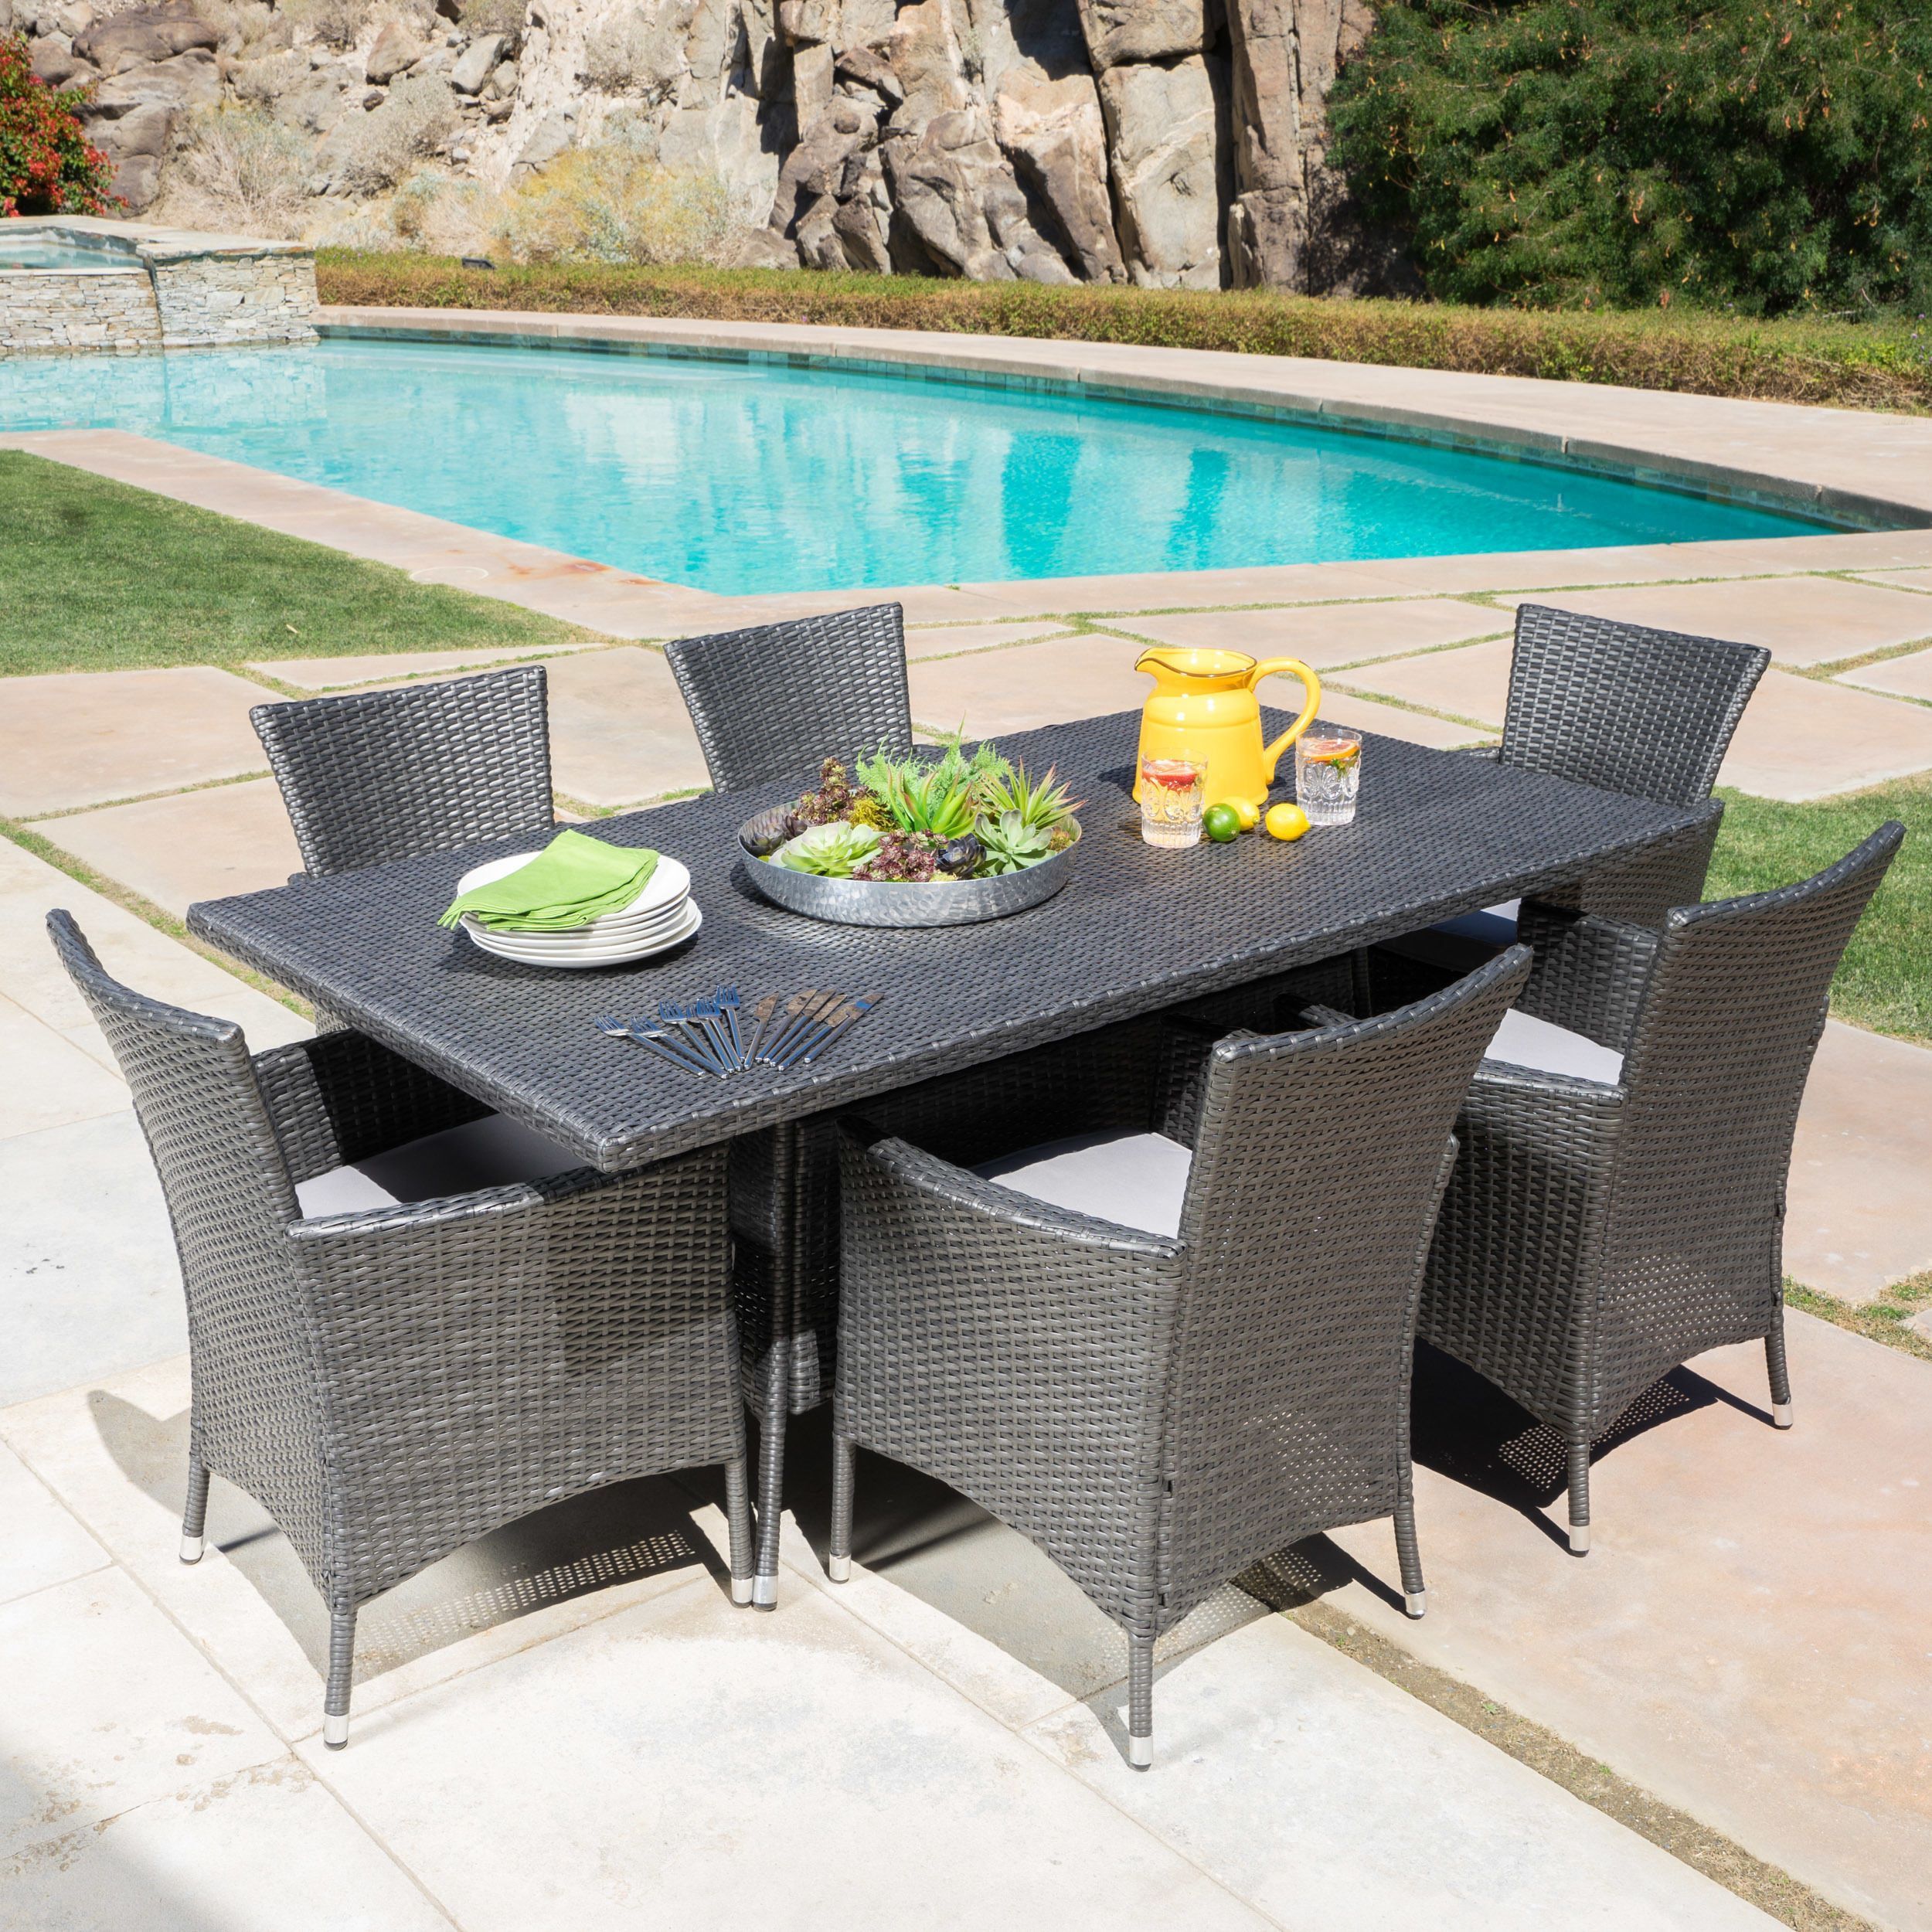 Malta Outdoor 7 Piece Rectangle Wicker Dining Set With Cushions With Regard To Wicker Rectangular Patio Dining Sets (View 3 of 15)